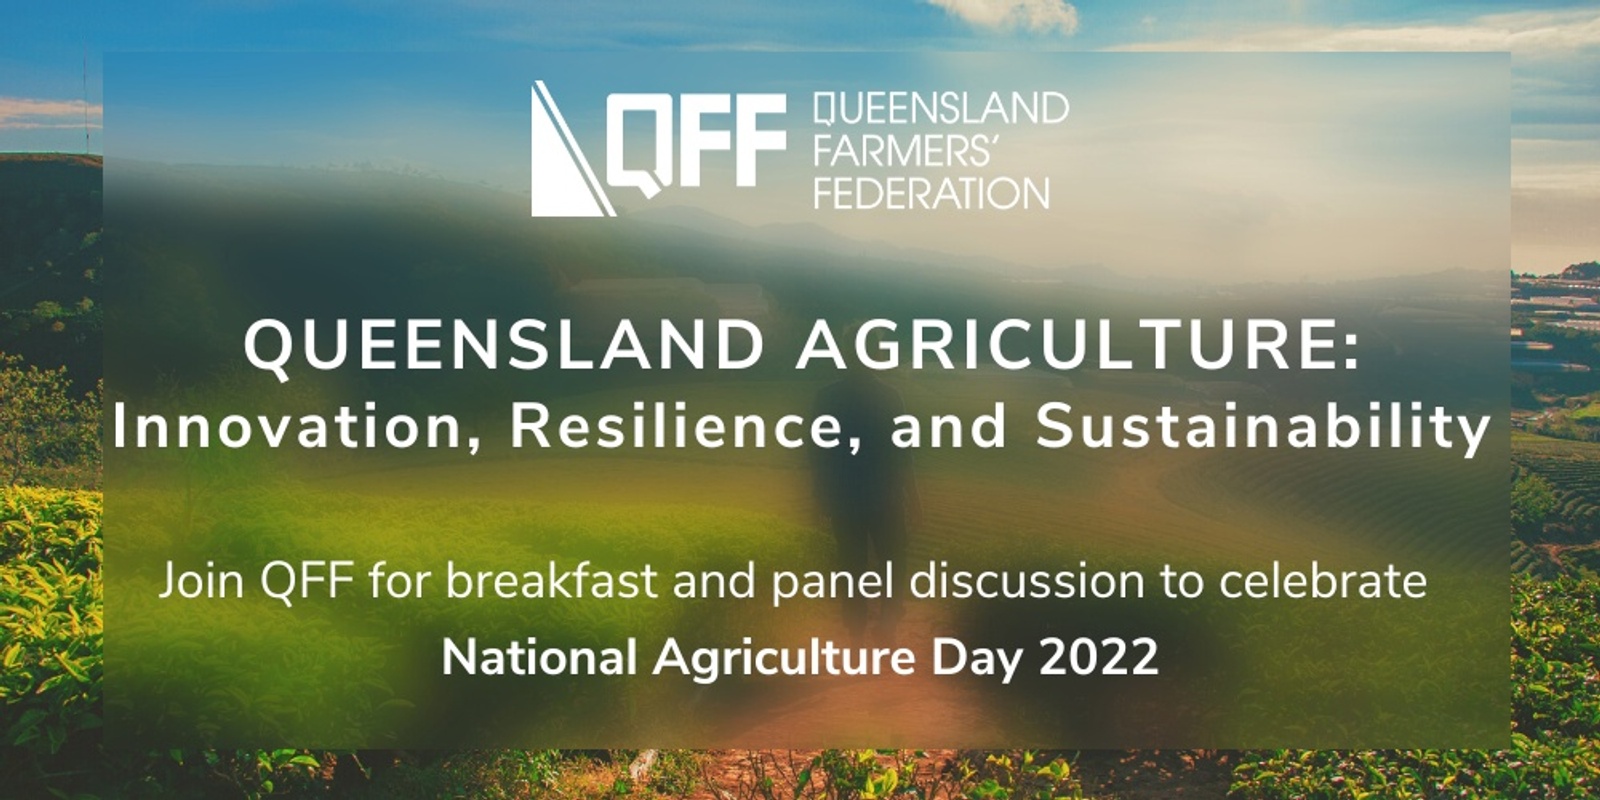 Banner image for QFF National Agriculture Day 2022 Breakfast: Queensland Agriculture - Innovation, Resilience, and Sustainability